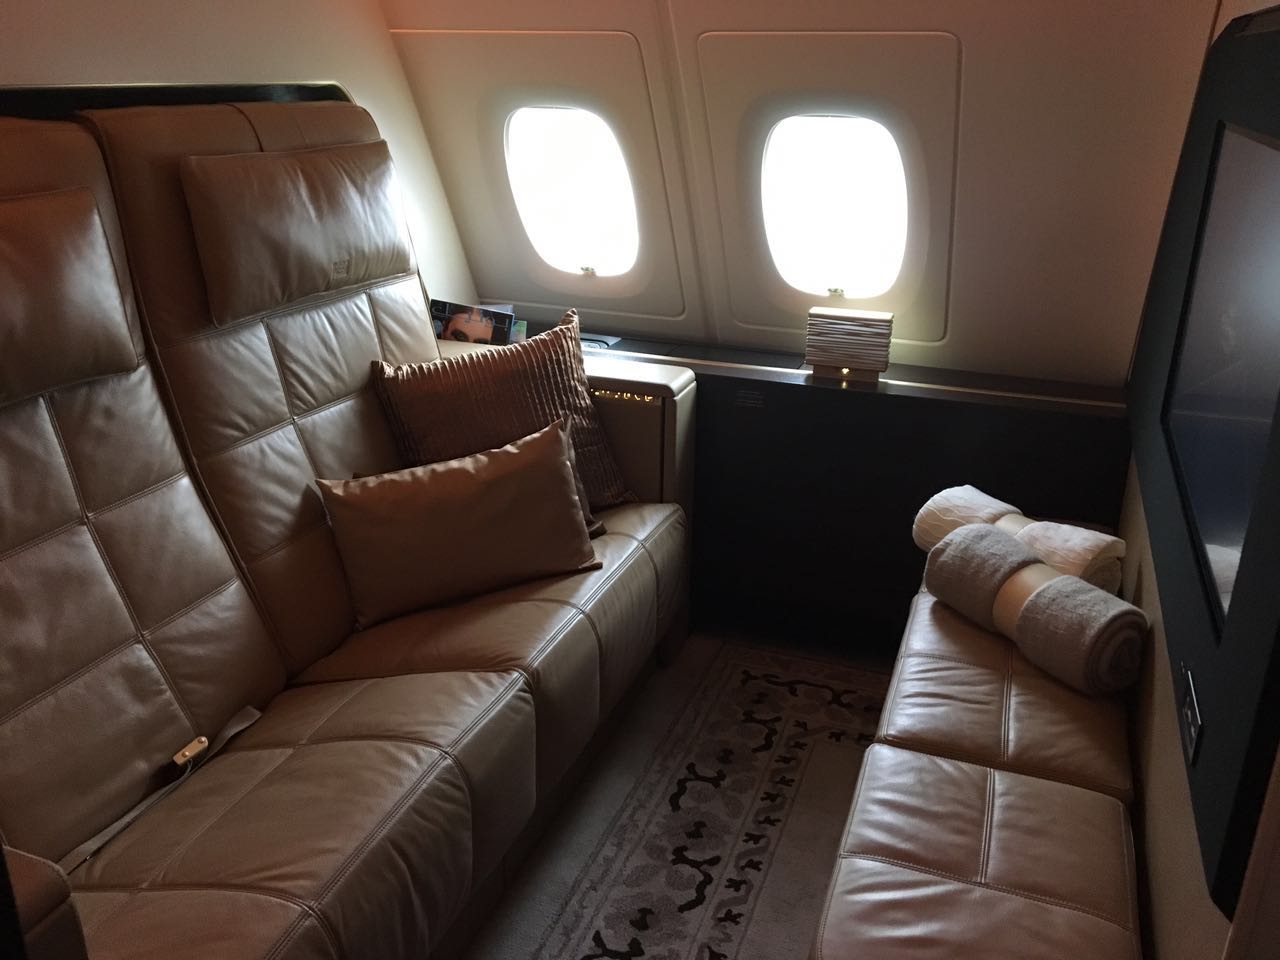 Etihad "The Residence" Living Room Couch + Ottoman